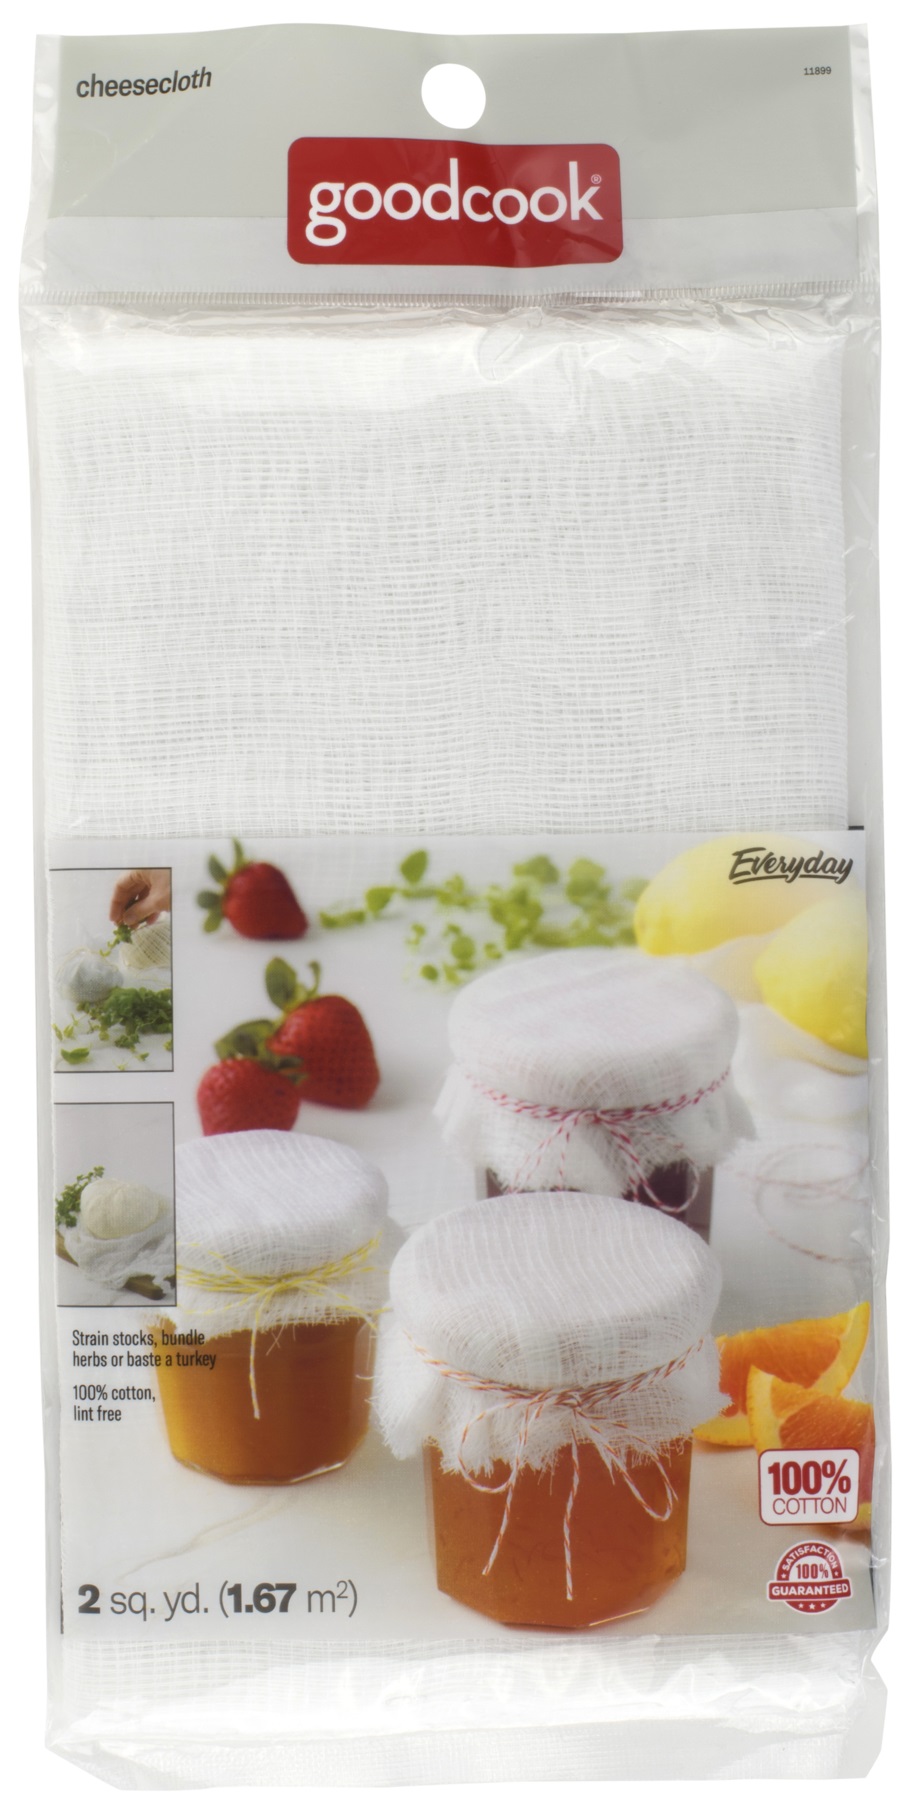 11899_GoodCook_Everyday_Cheesecloth 2 Sq Yds_Packaging 1.psd